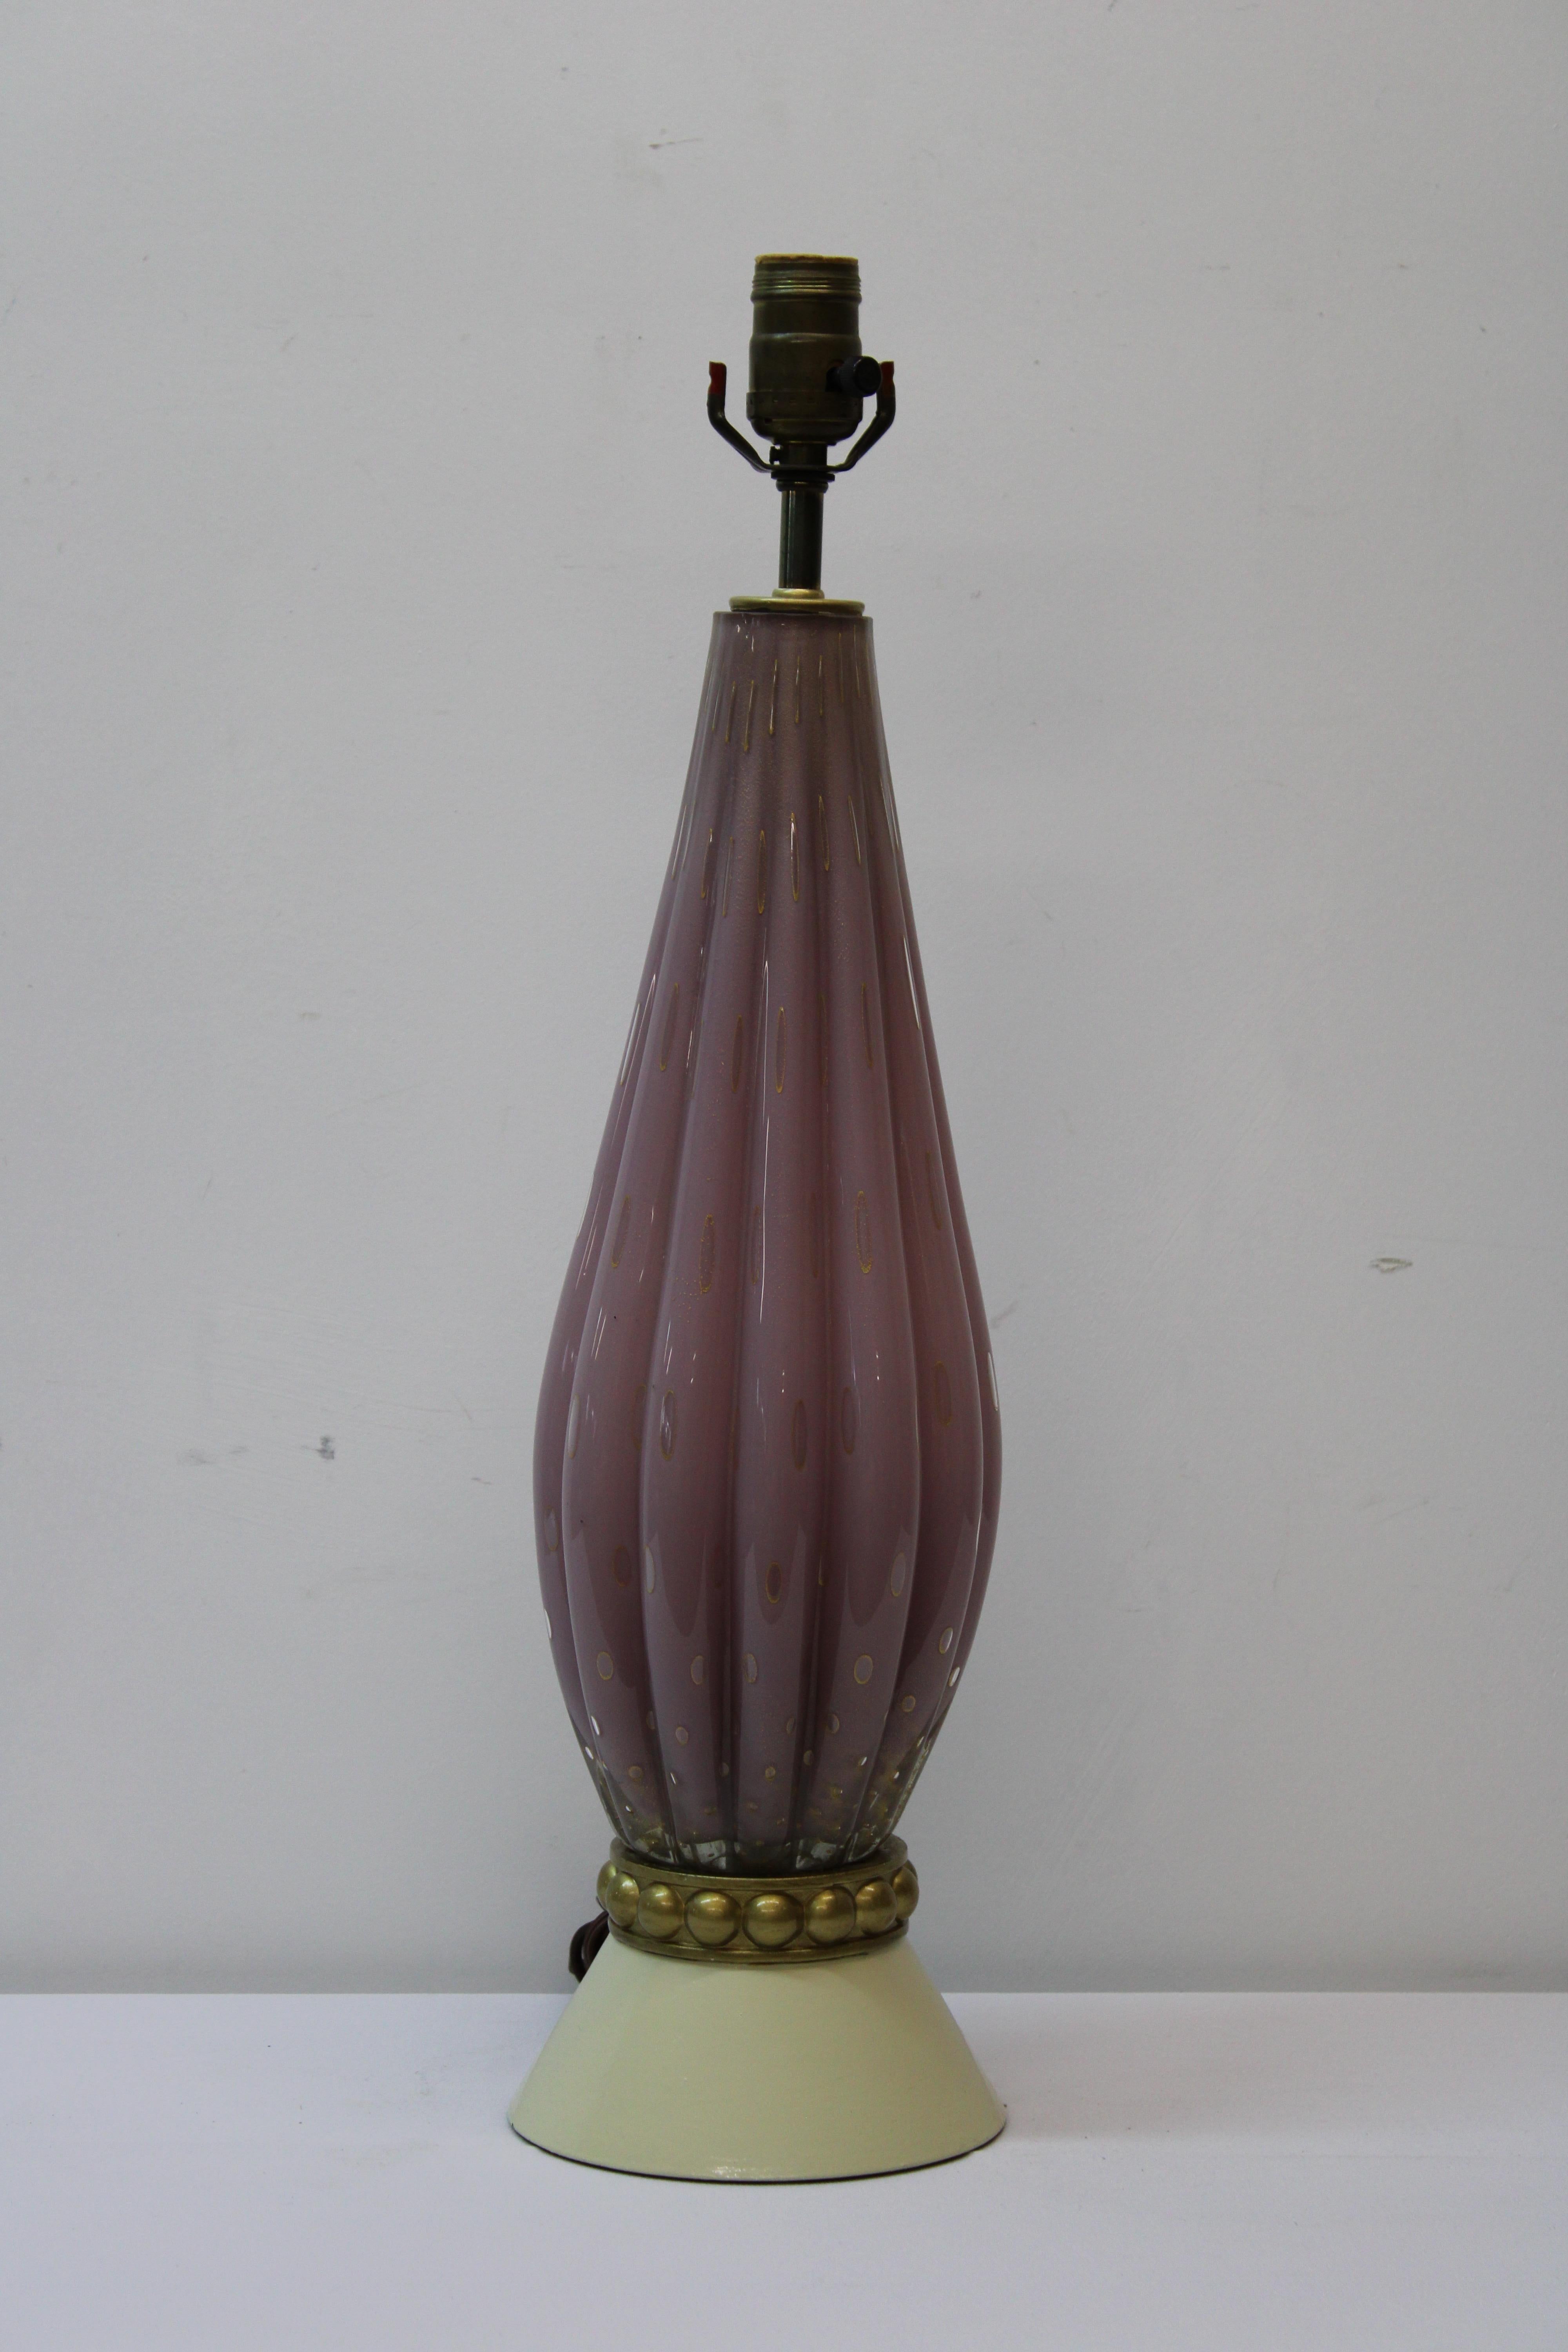 C. 20th century

Beautiful Murano purple & gold table lamps By Alfredo Barbini

These Lamps are adorable !